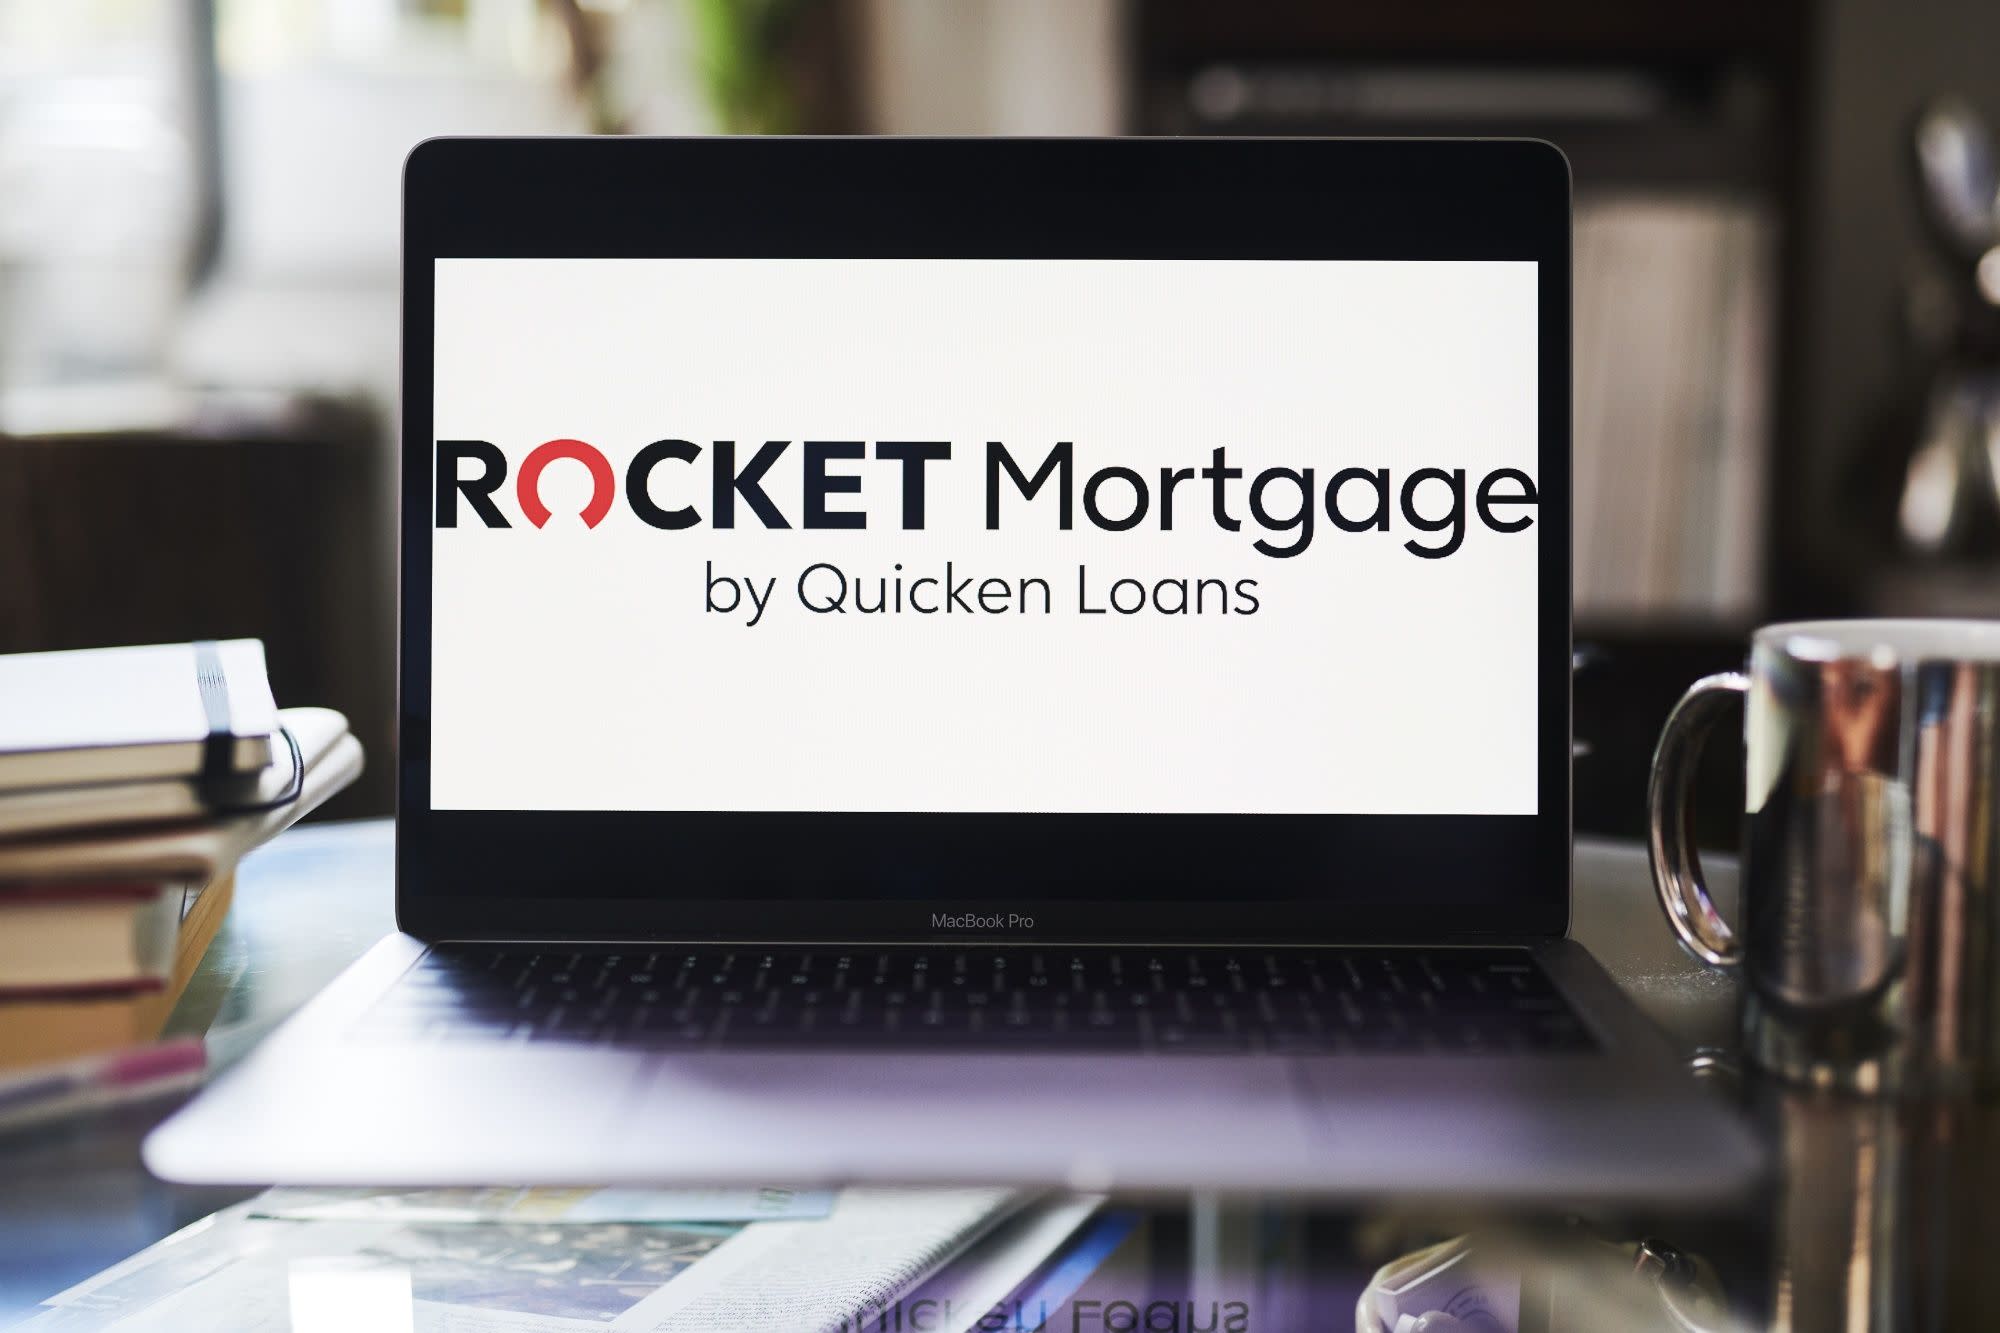 The rocket mortgage raises the housing boom to 277% profit increase